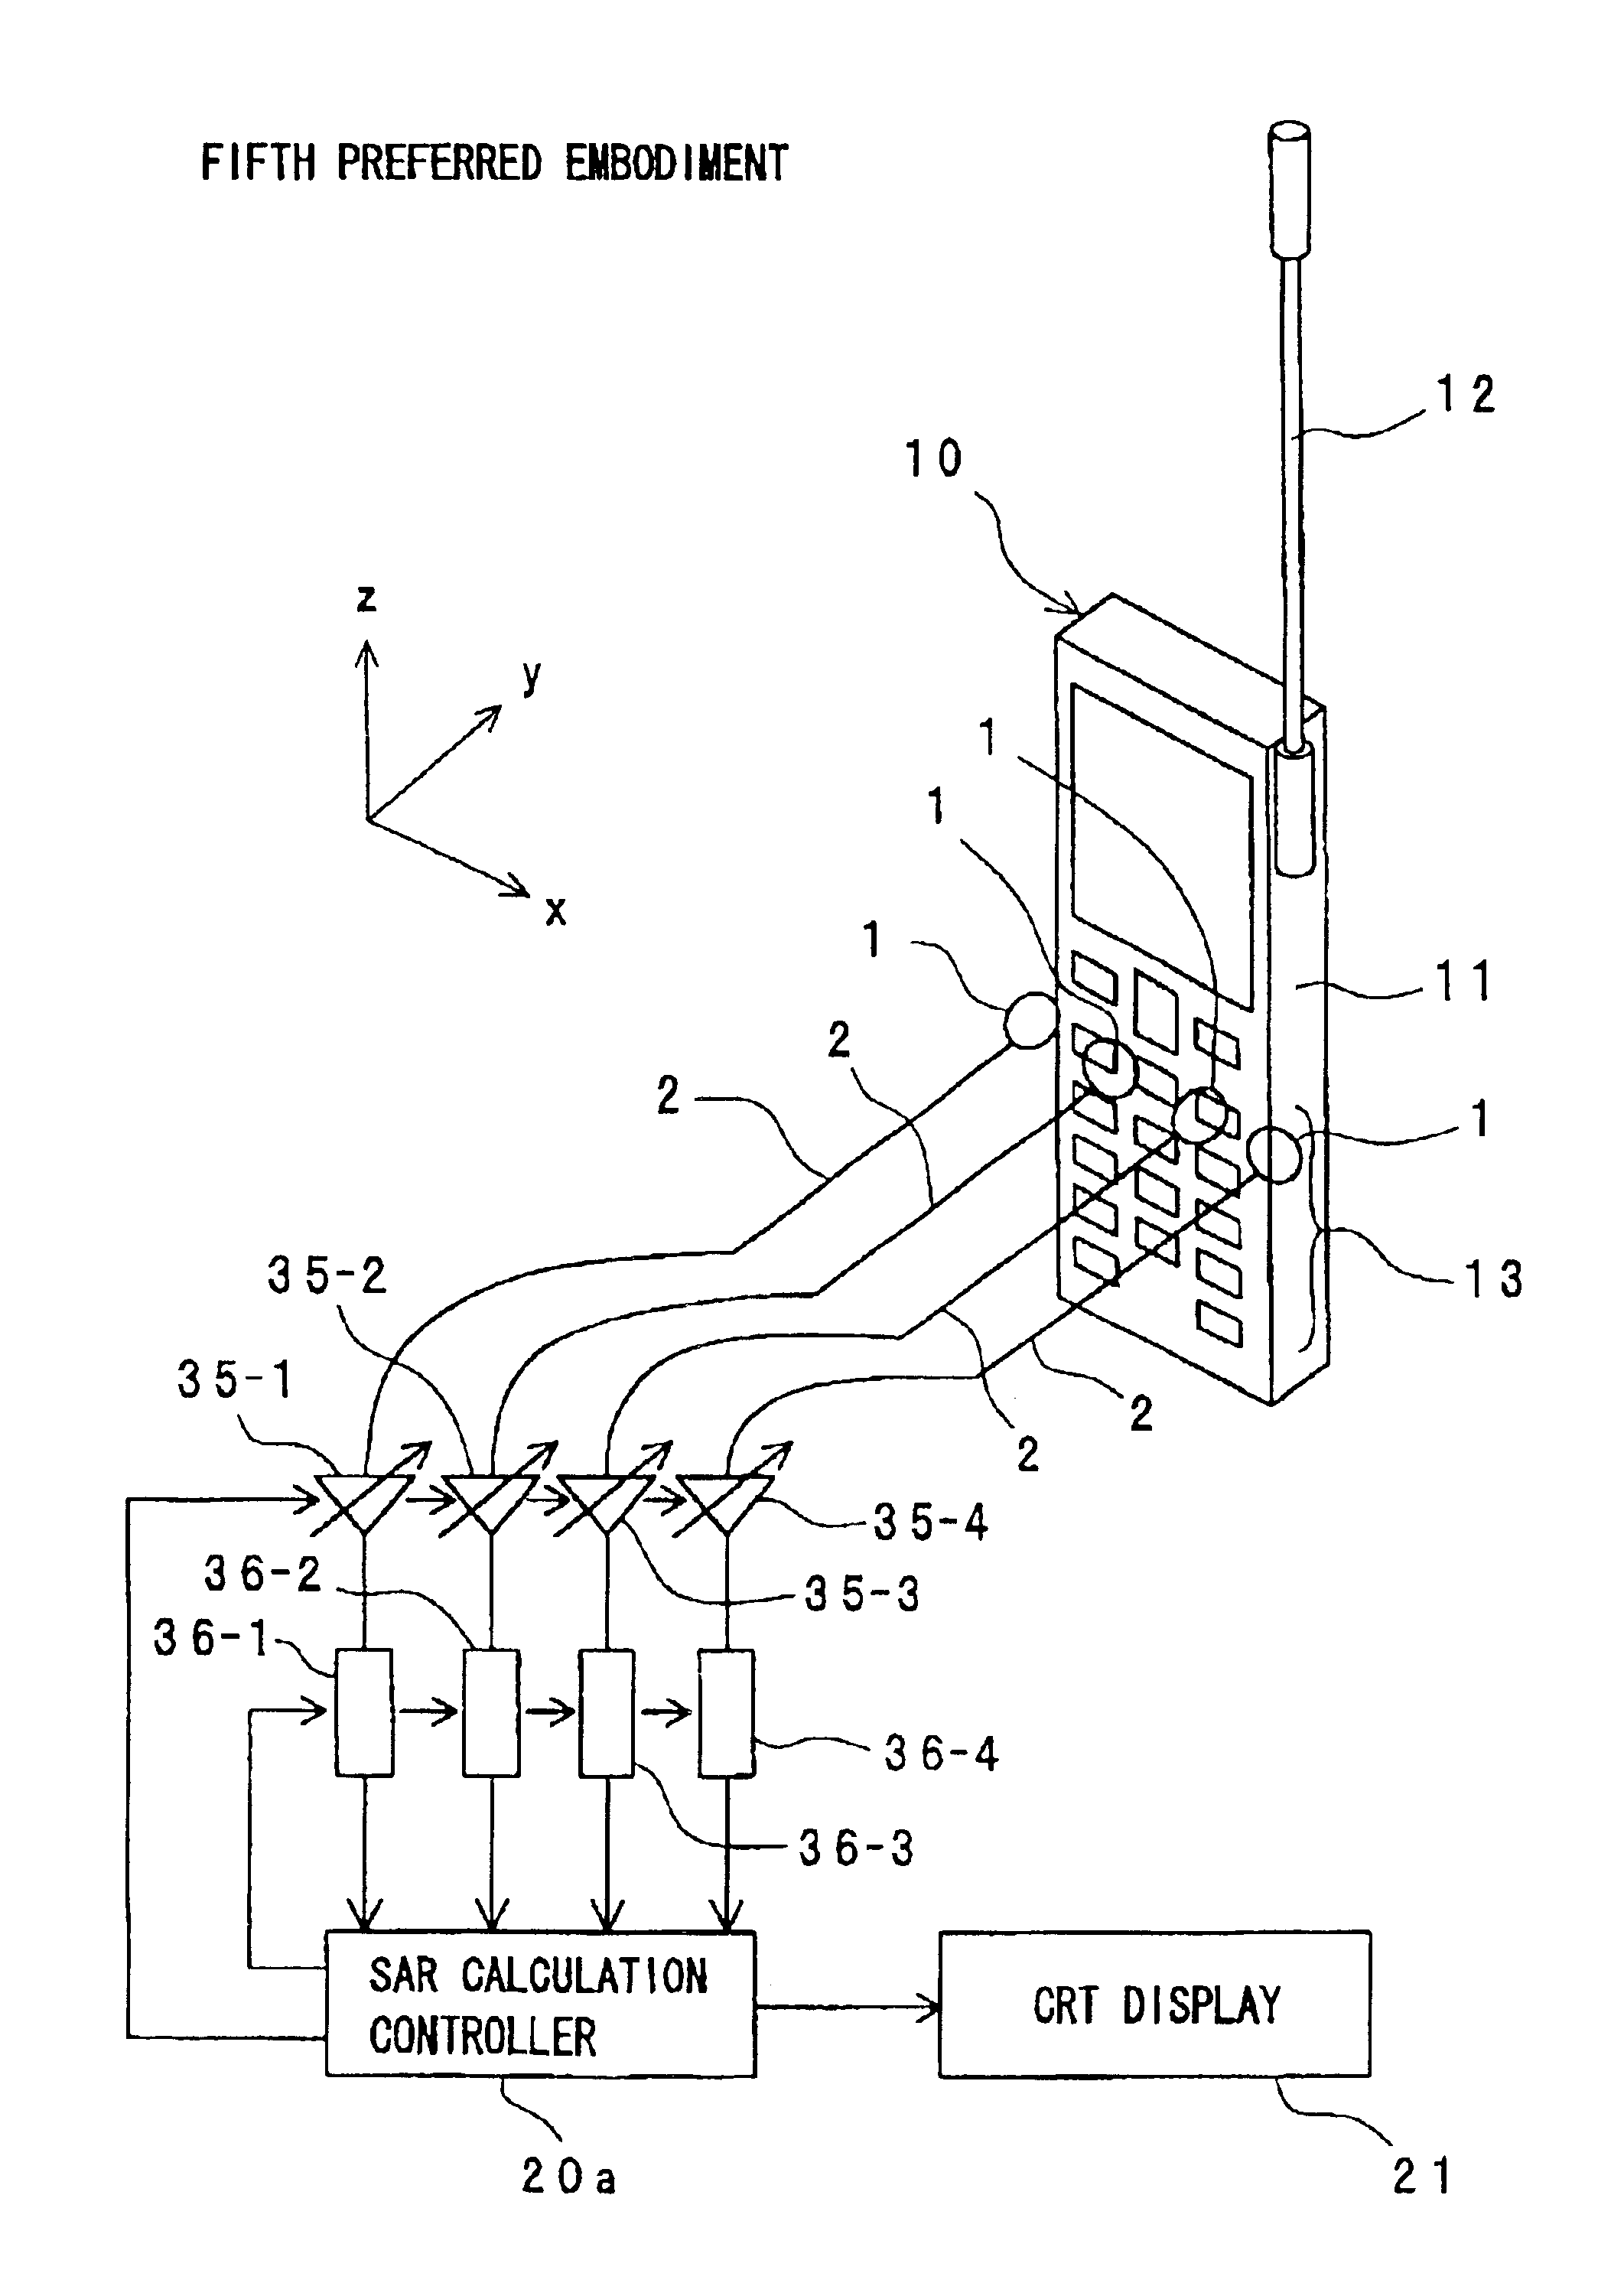 Apparatus for measuring specific absorption rate based on near magnetic field for use in radio apparatus